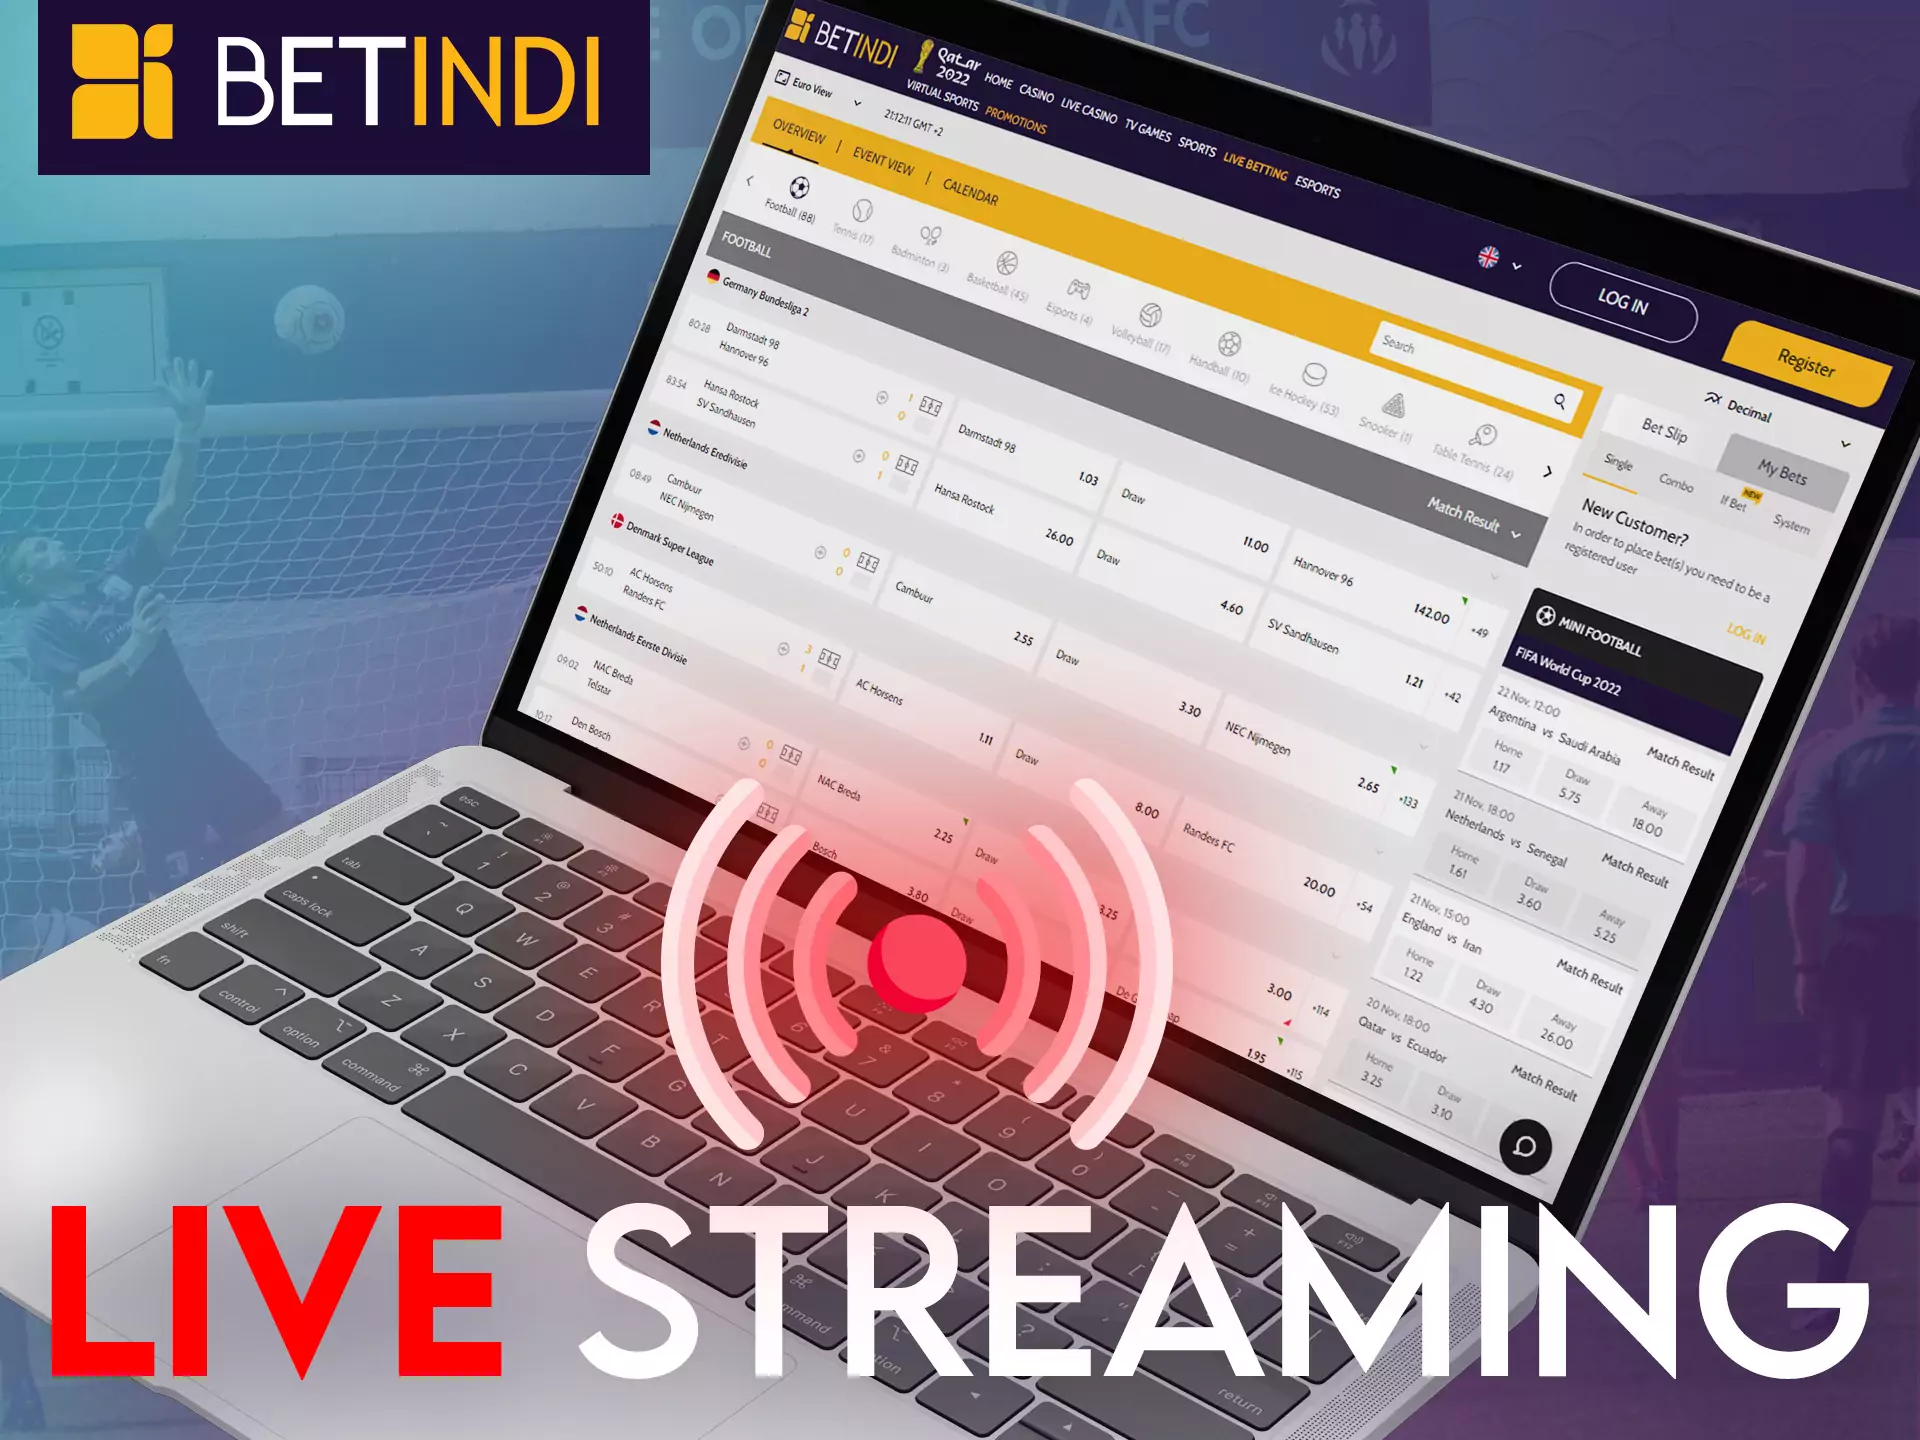 Watch live streaming with your favorite teams on Betindi.